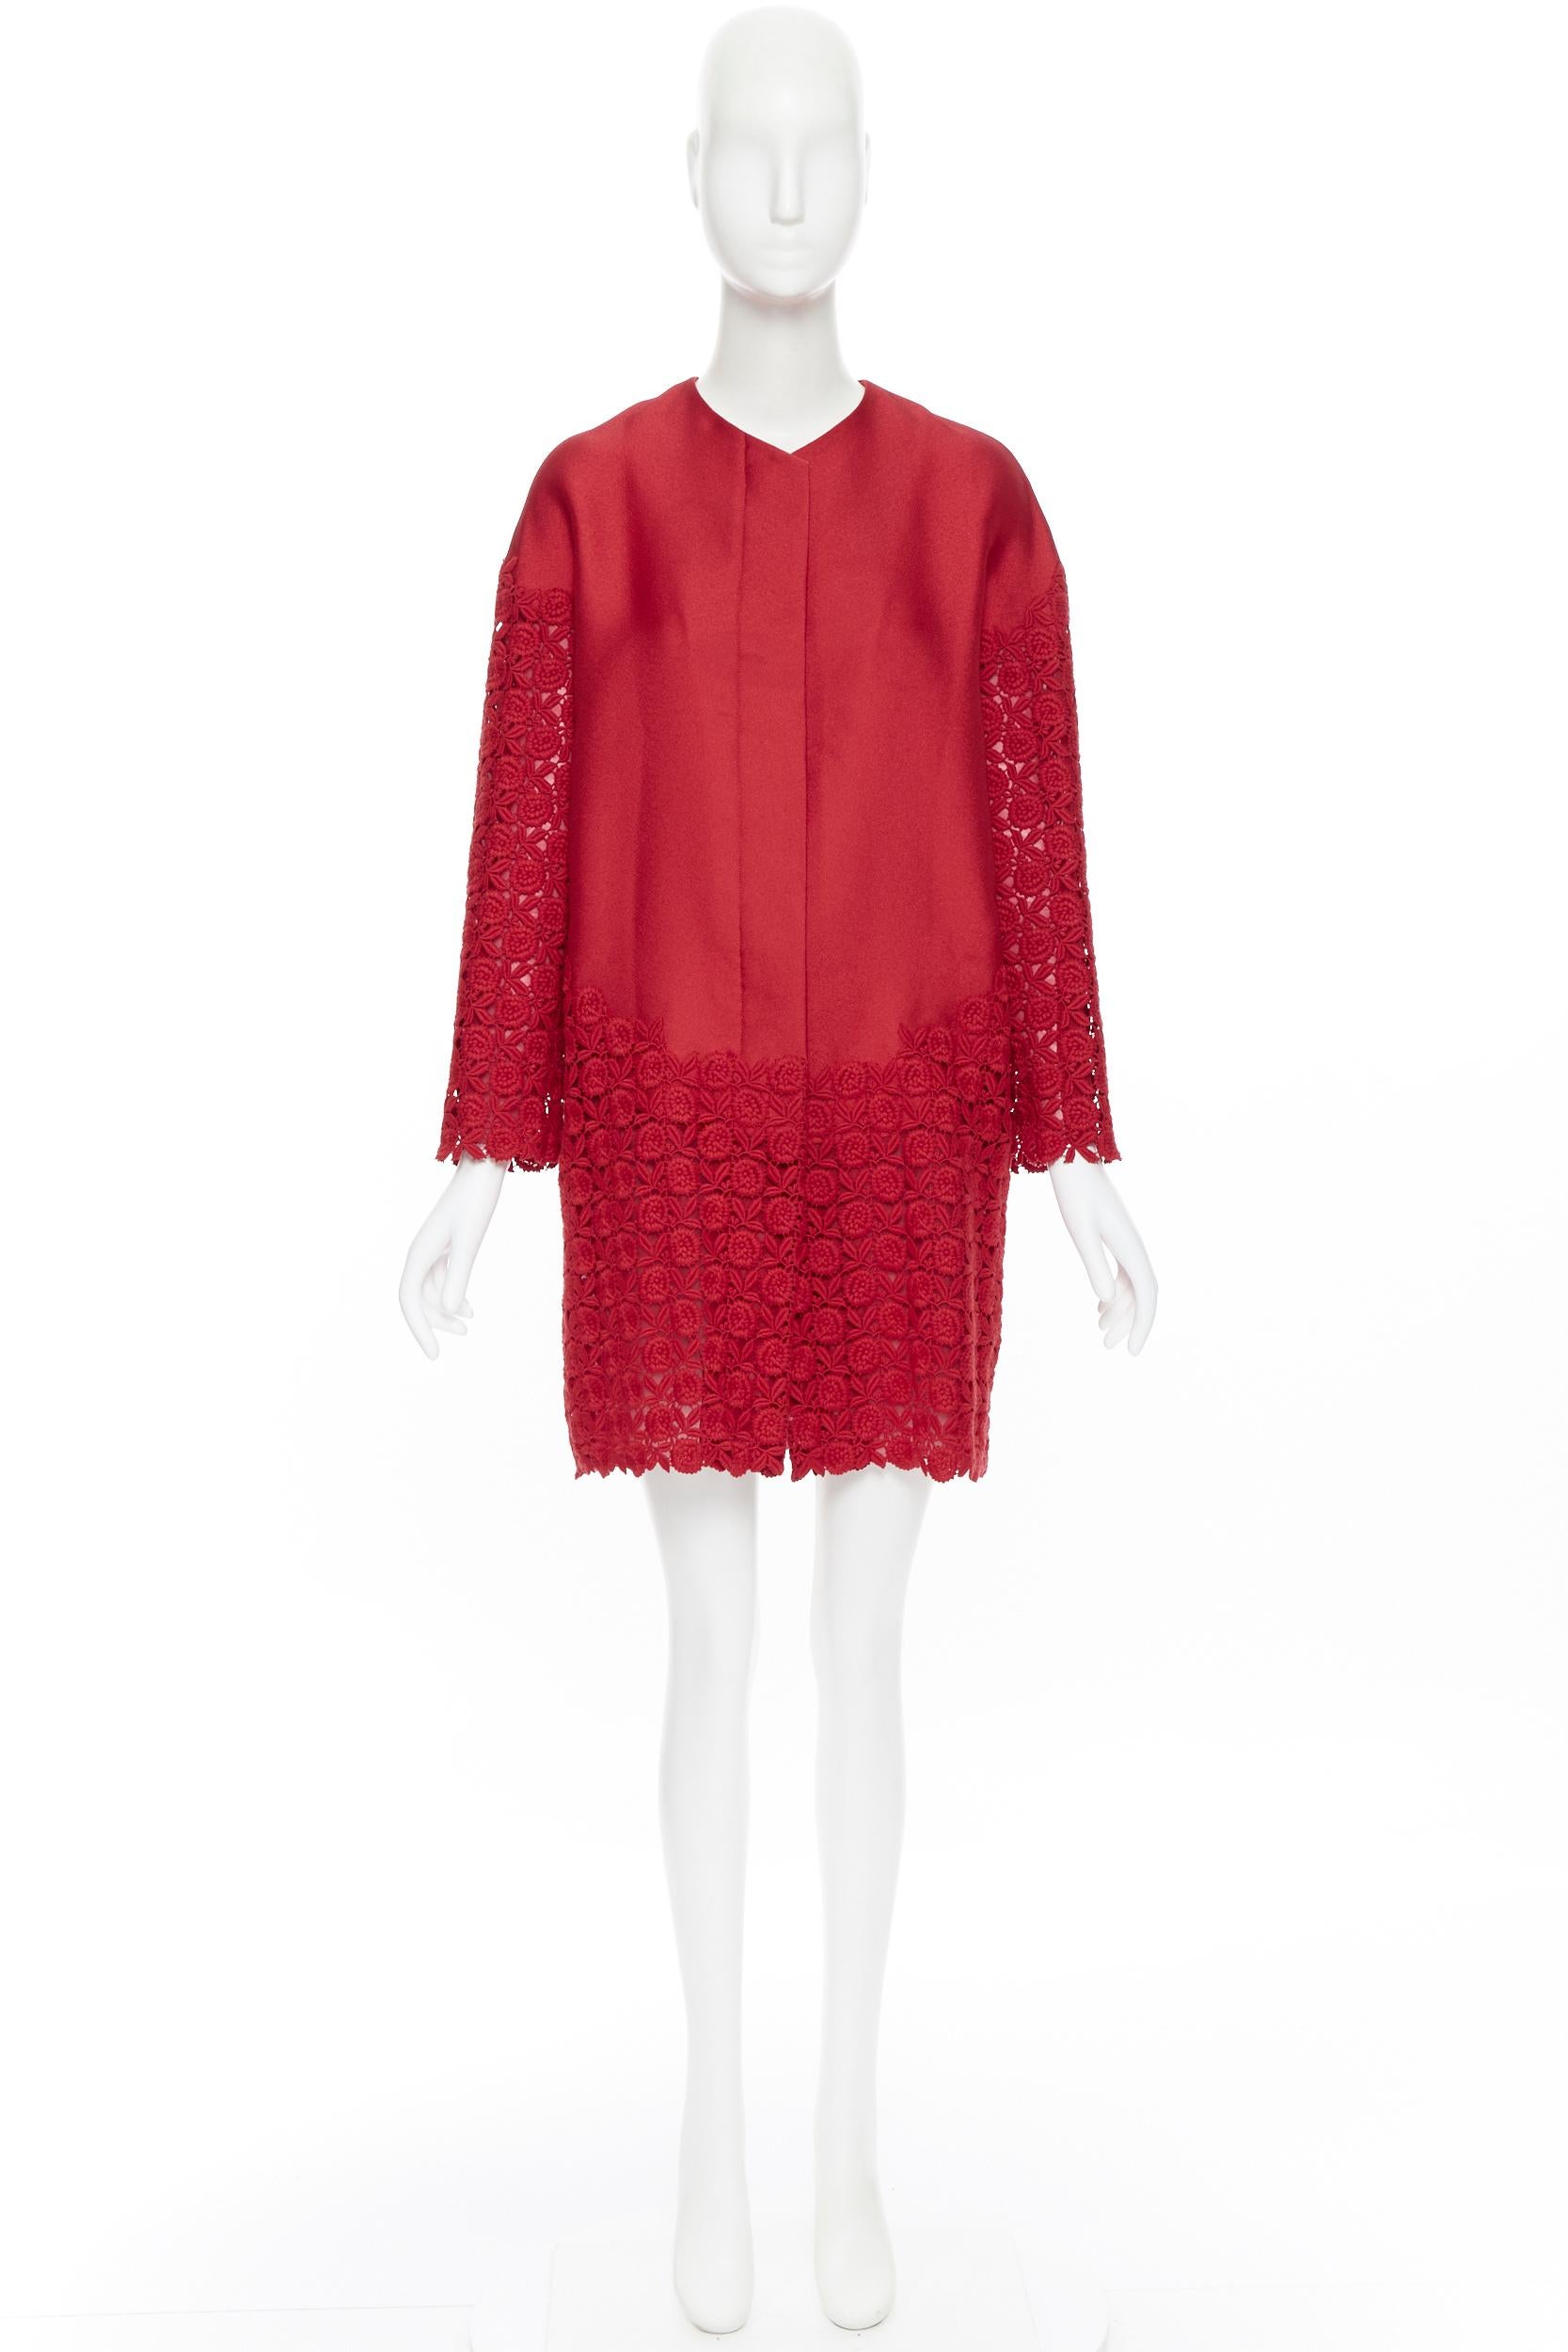 new SHIATZY CHEN red silk crepe floral embroidered lace sleeve cocoon coat FR36
Brand: Shiatzy Chen
Designer: Shiatzy Chen
Model Name / Style: Cocoon coat
Material: Silk
Color: Red
Pattern: Floral
Closure: Button
Extra Detail: Concealed button front